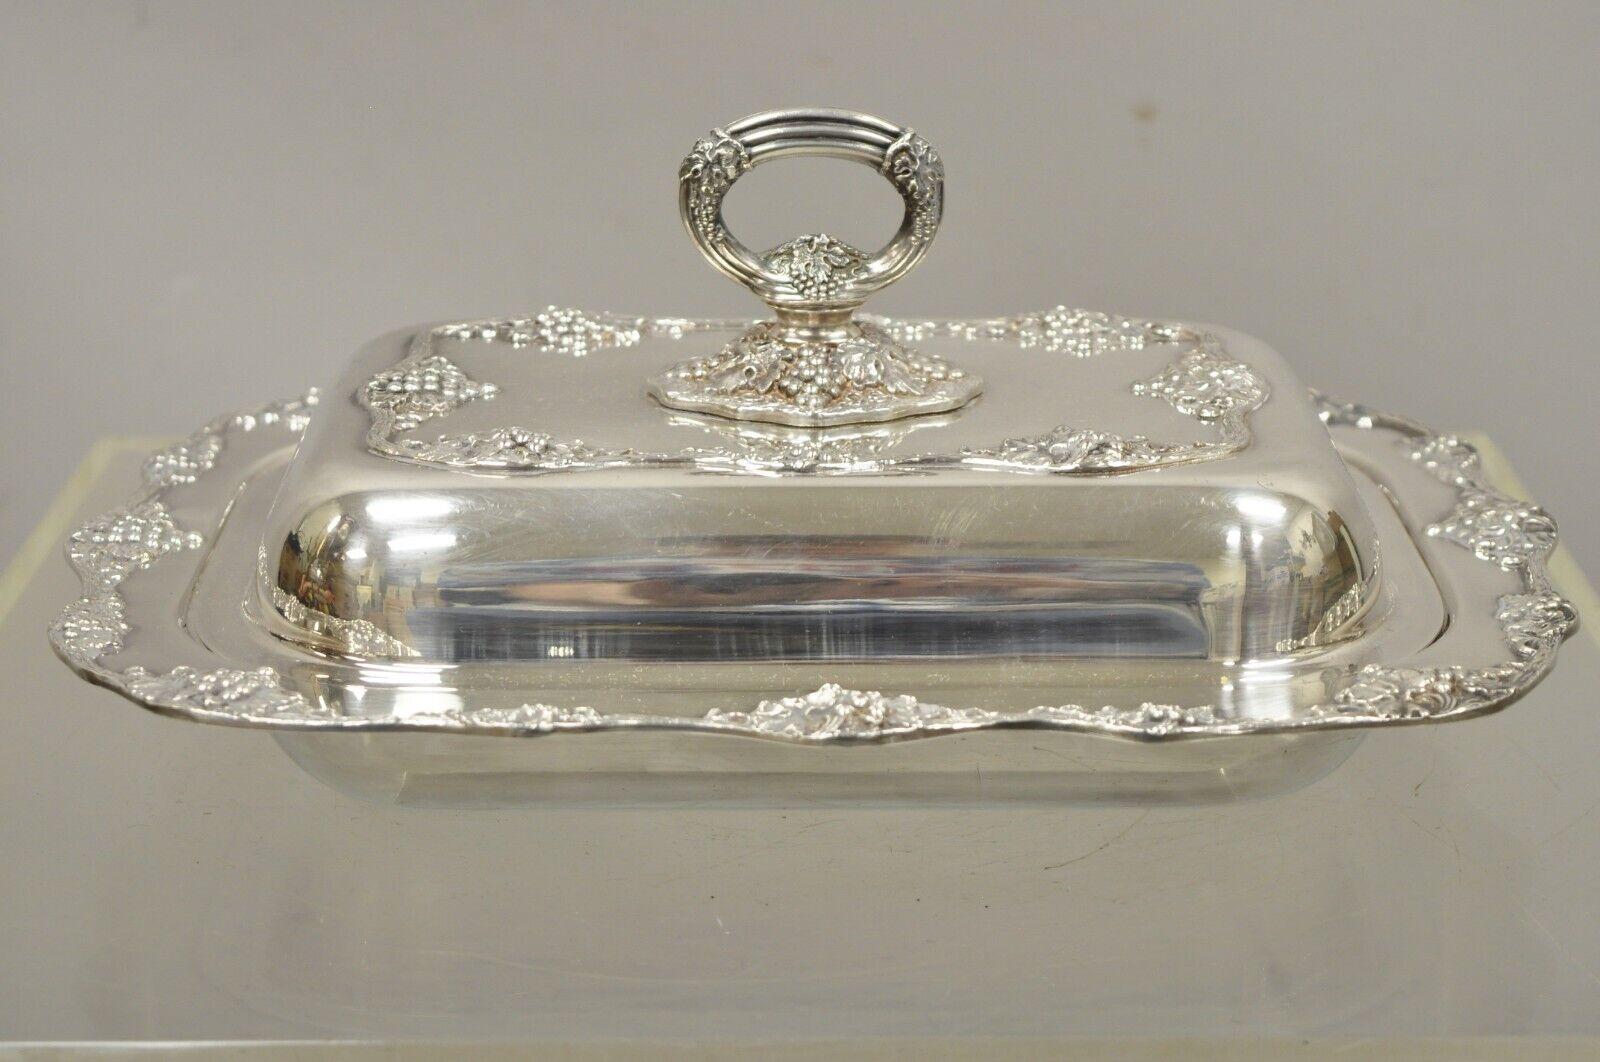 Oneida silver plated grape vine Regency style covered serving dish. Item features a grape and vine decoration, covered with lid, original stamp, quality craftsmanship. Circa mid 20th century. Measurements: 5.5